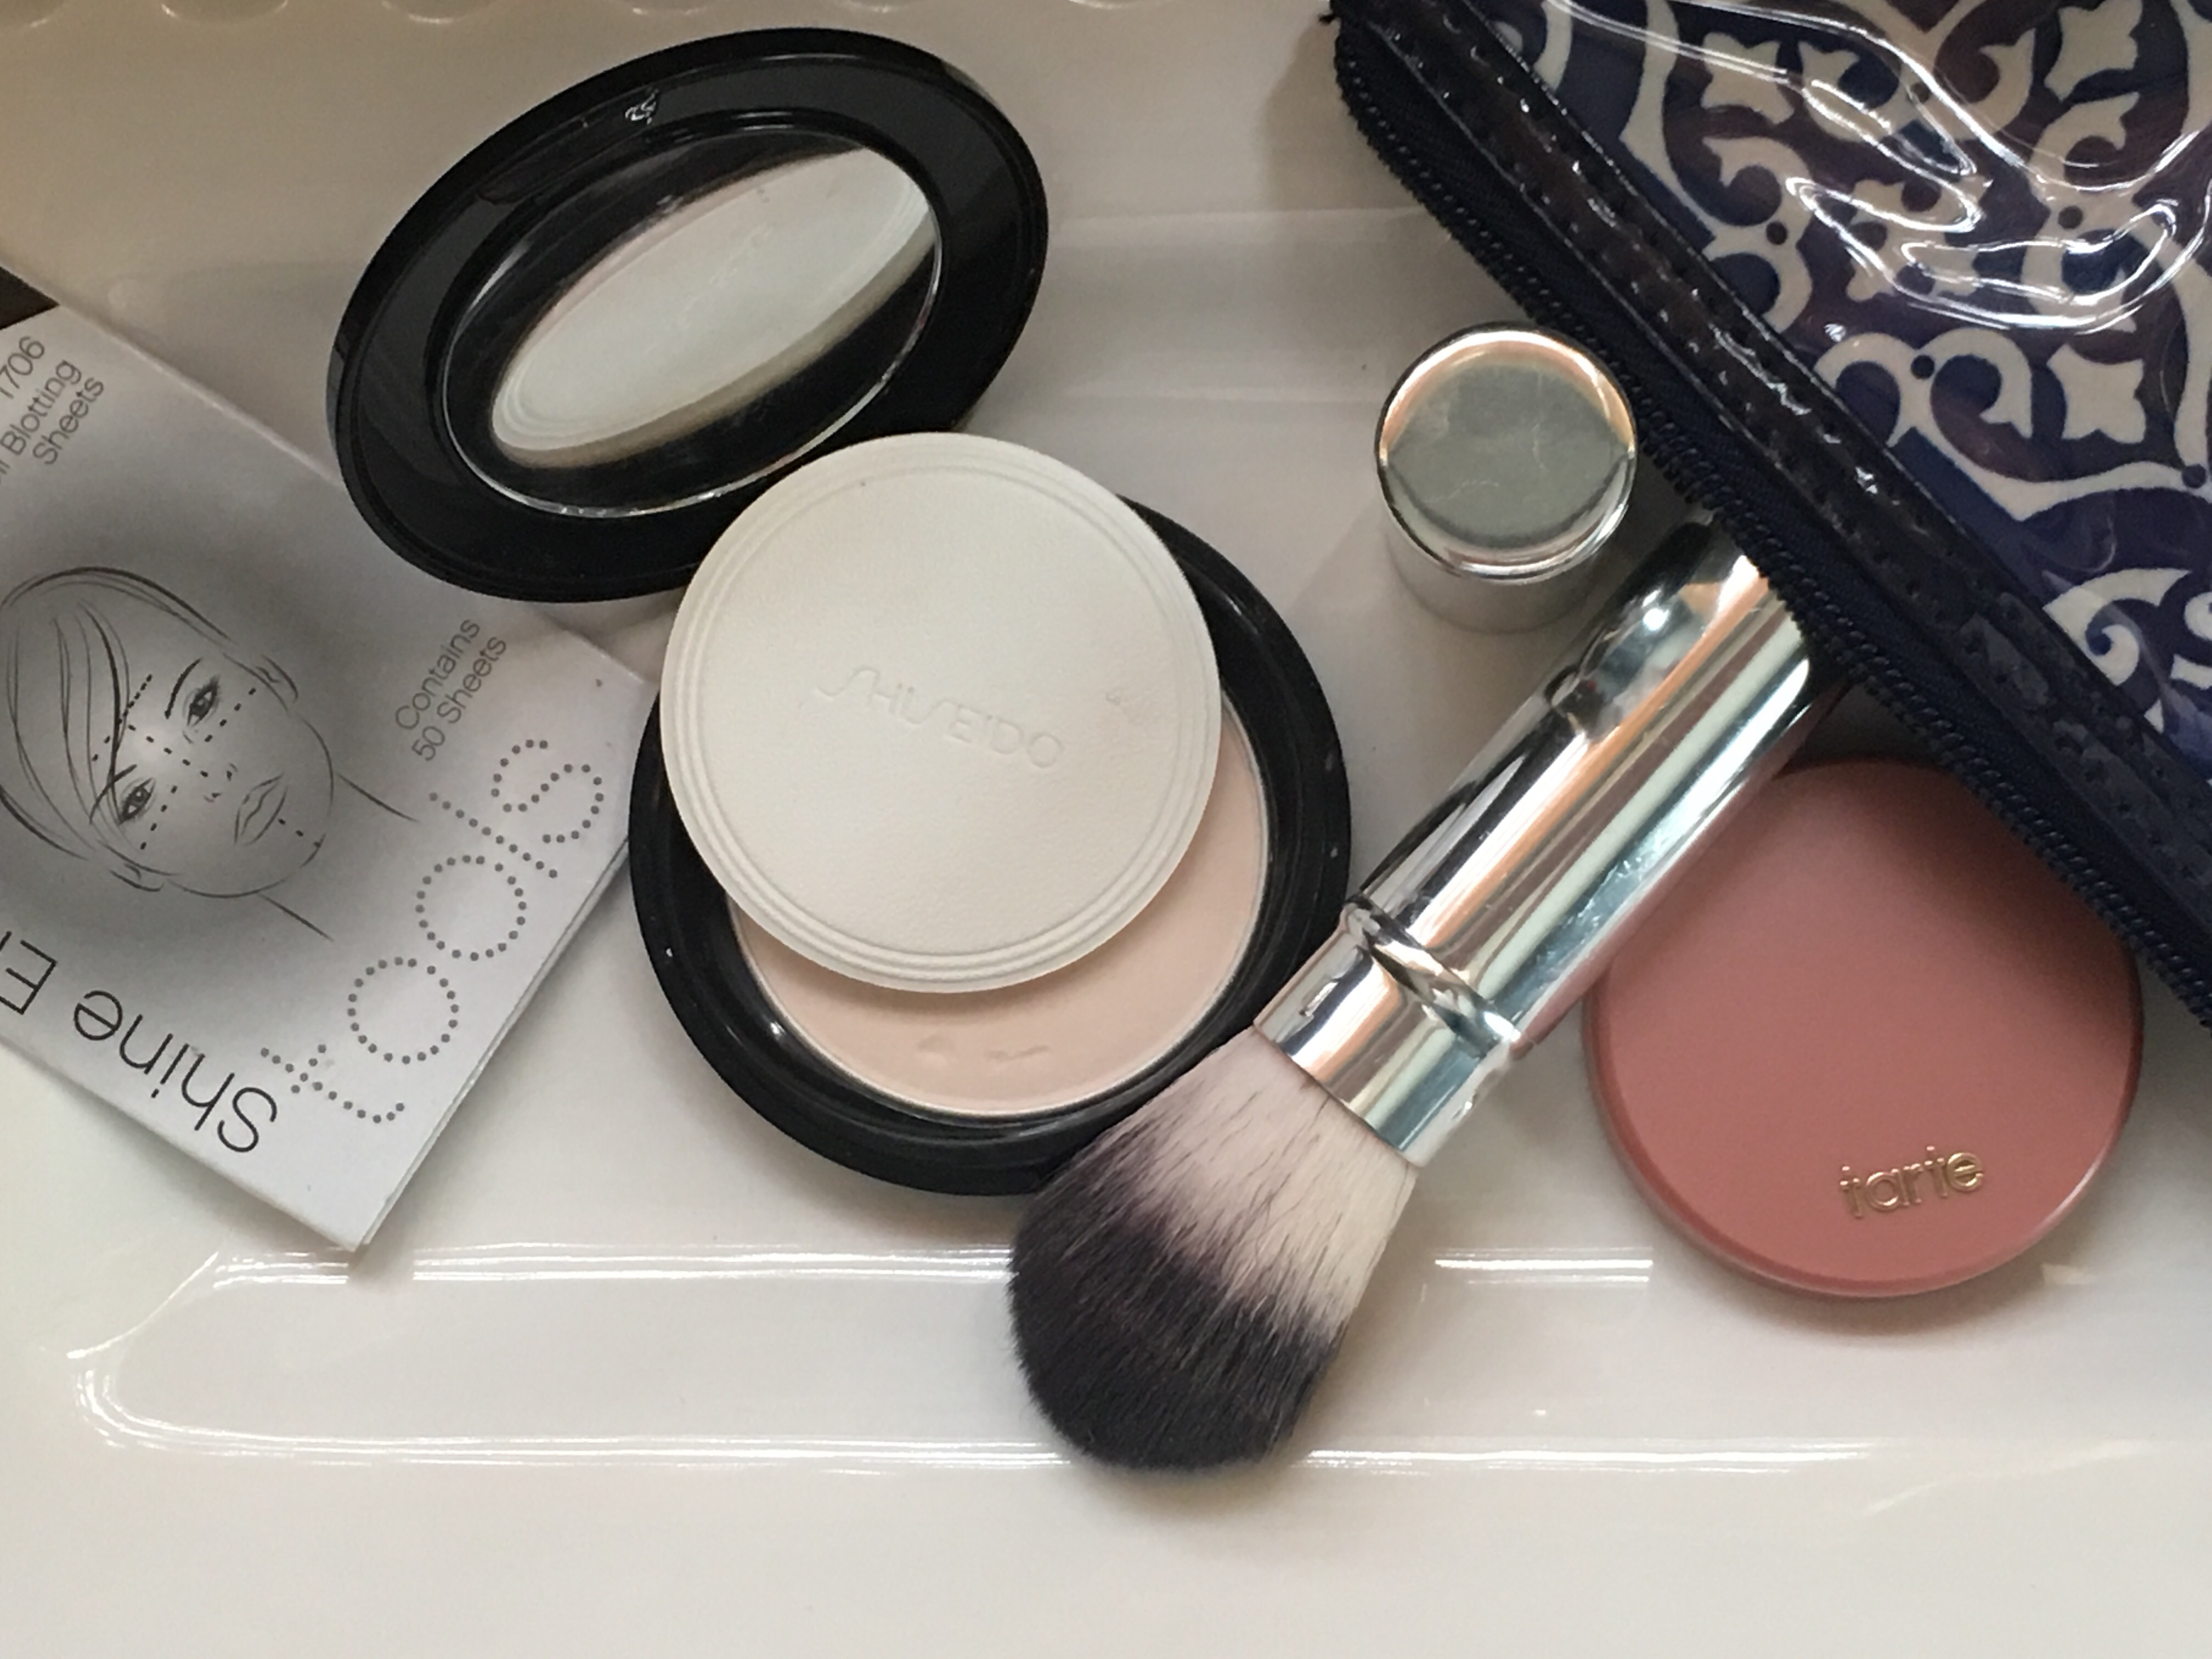 Mid Day Touch Up: Blotting papers, blush and powder